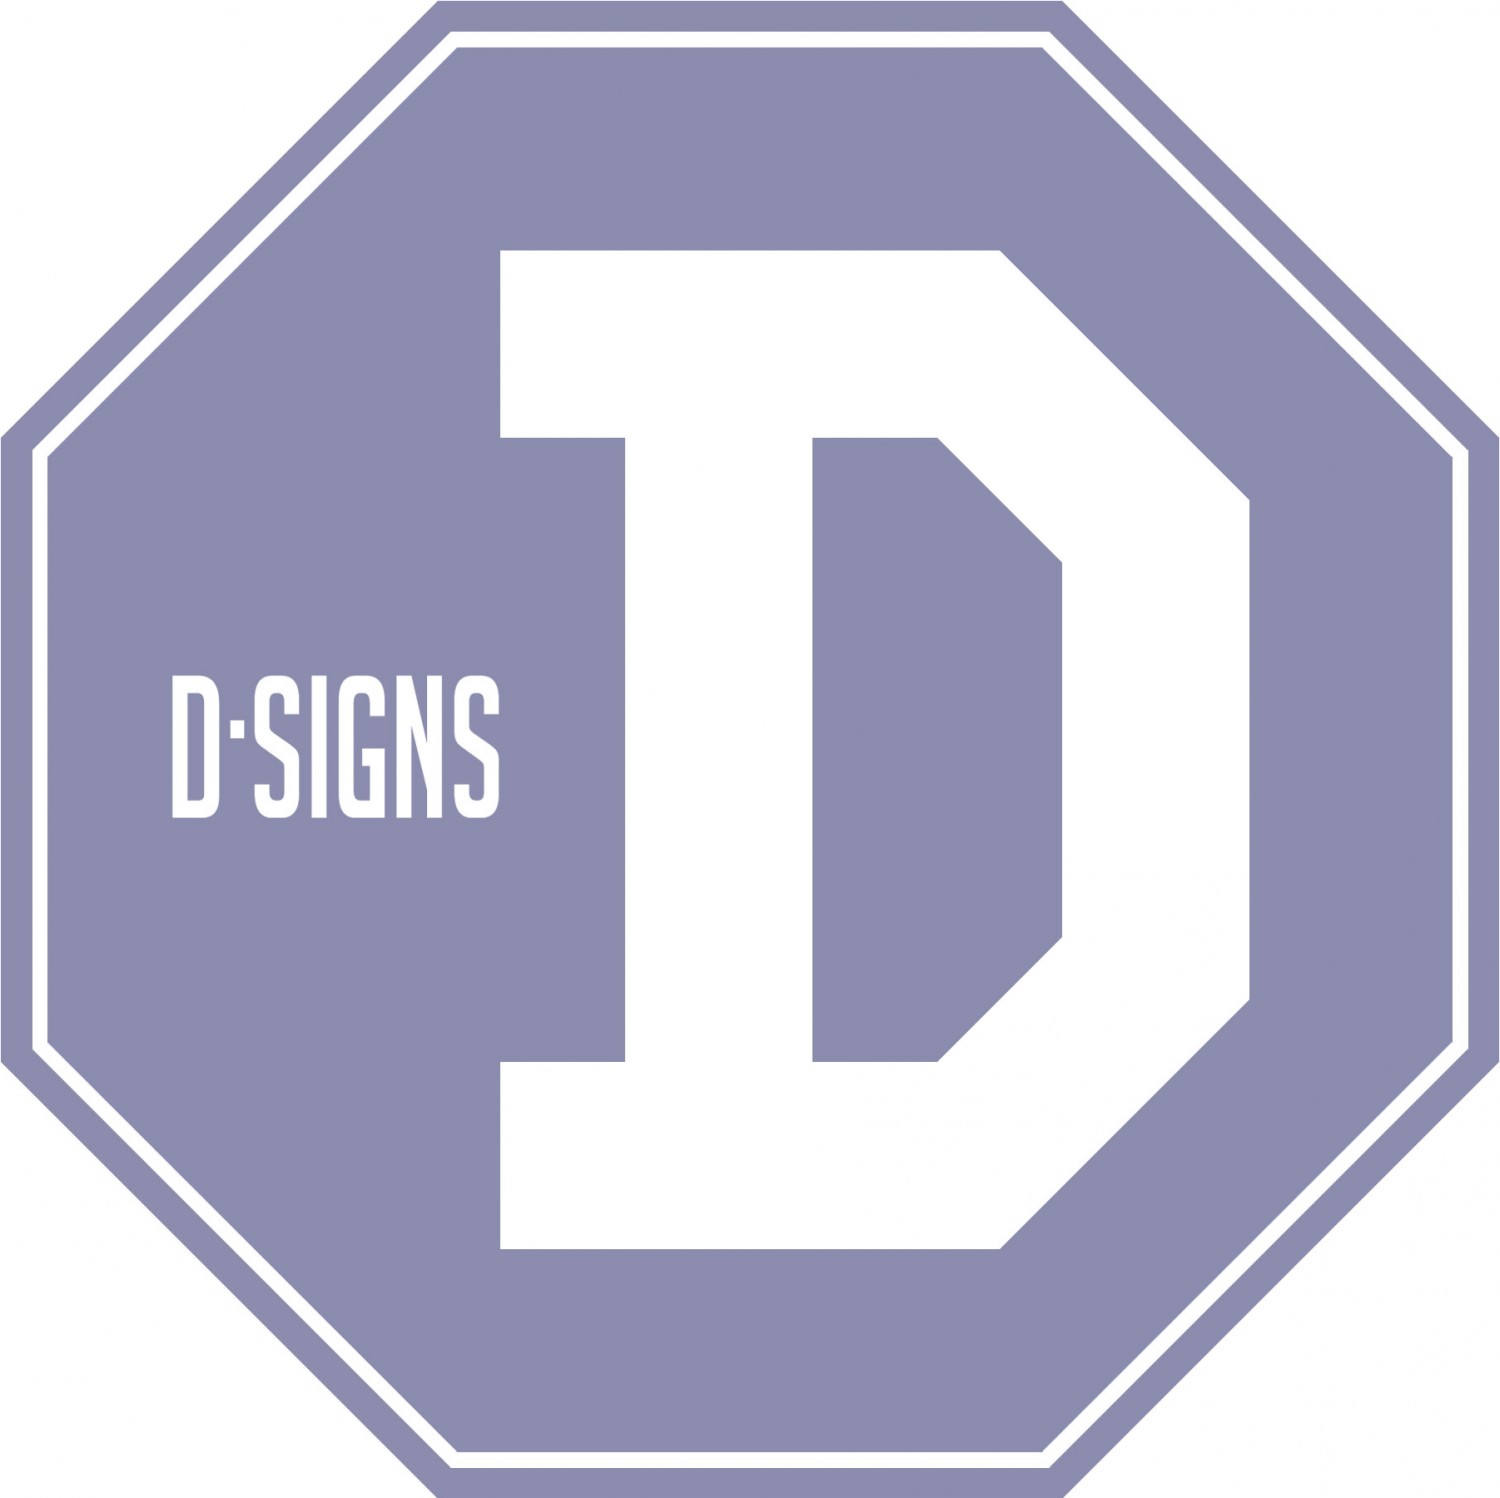 D SIGNS